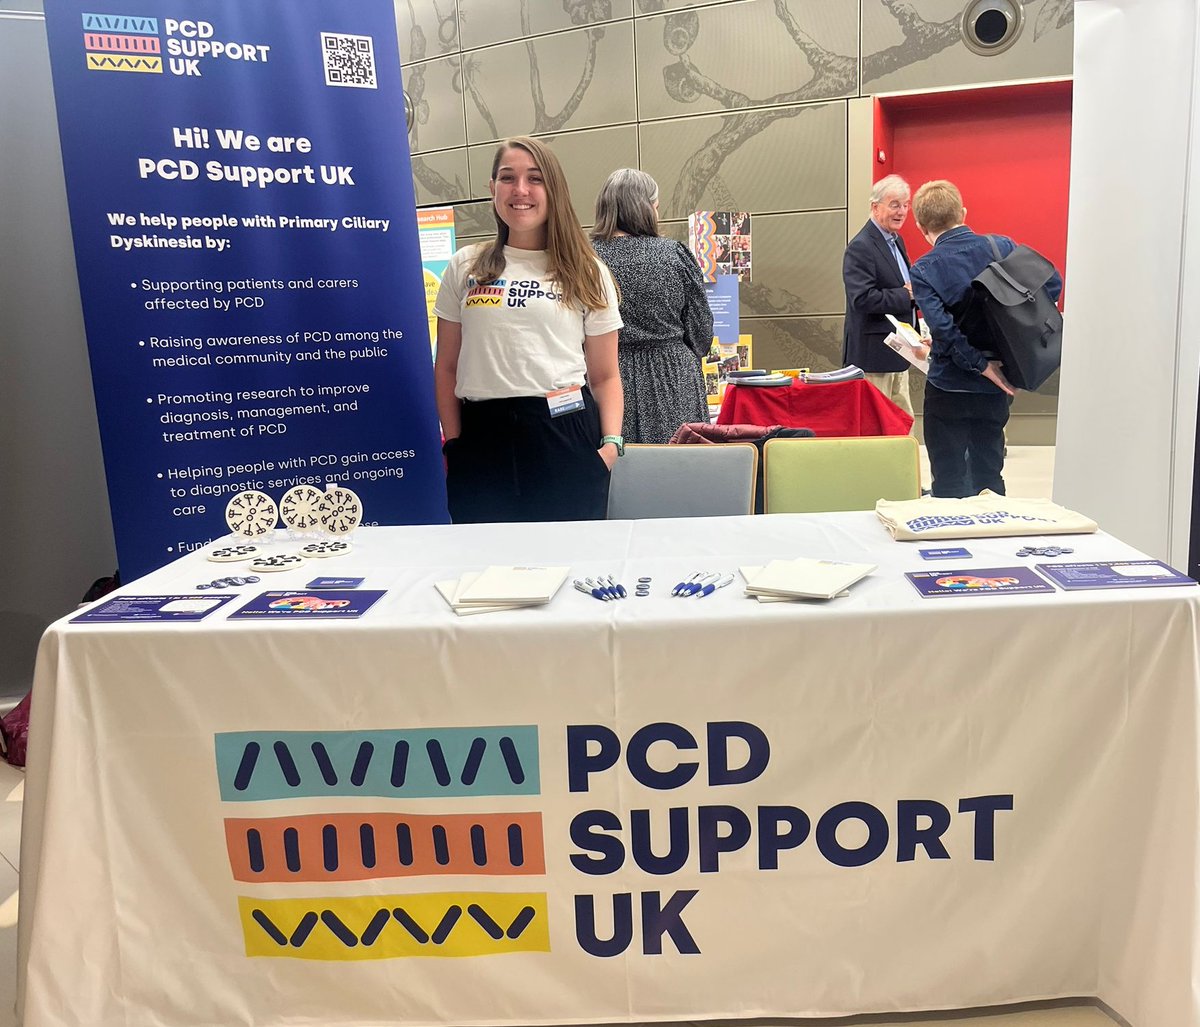 Delighted to be here chatting about #PCD today at #RARESummit23. Come and say hi! 👋 @PCD_UK @camraredisease #PrimaryCiliaryDyskinesia #DareToThinkRare